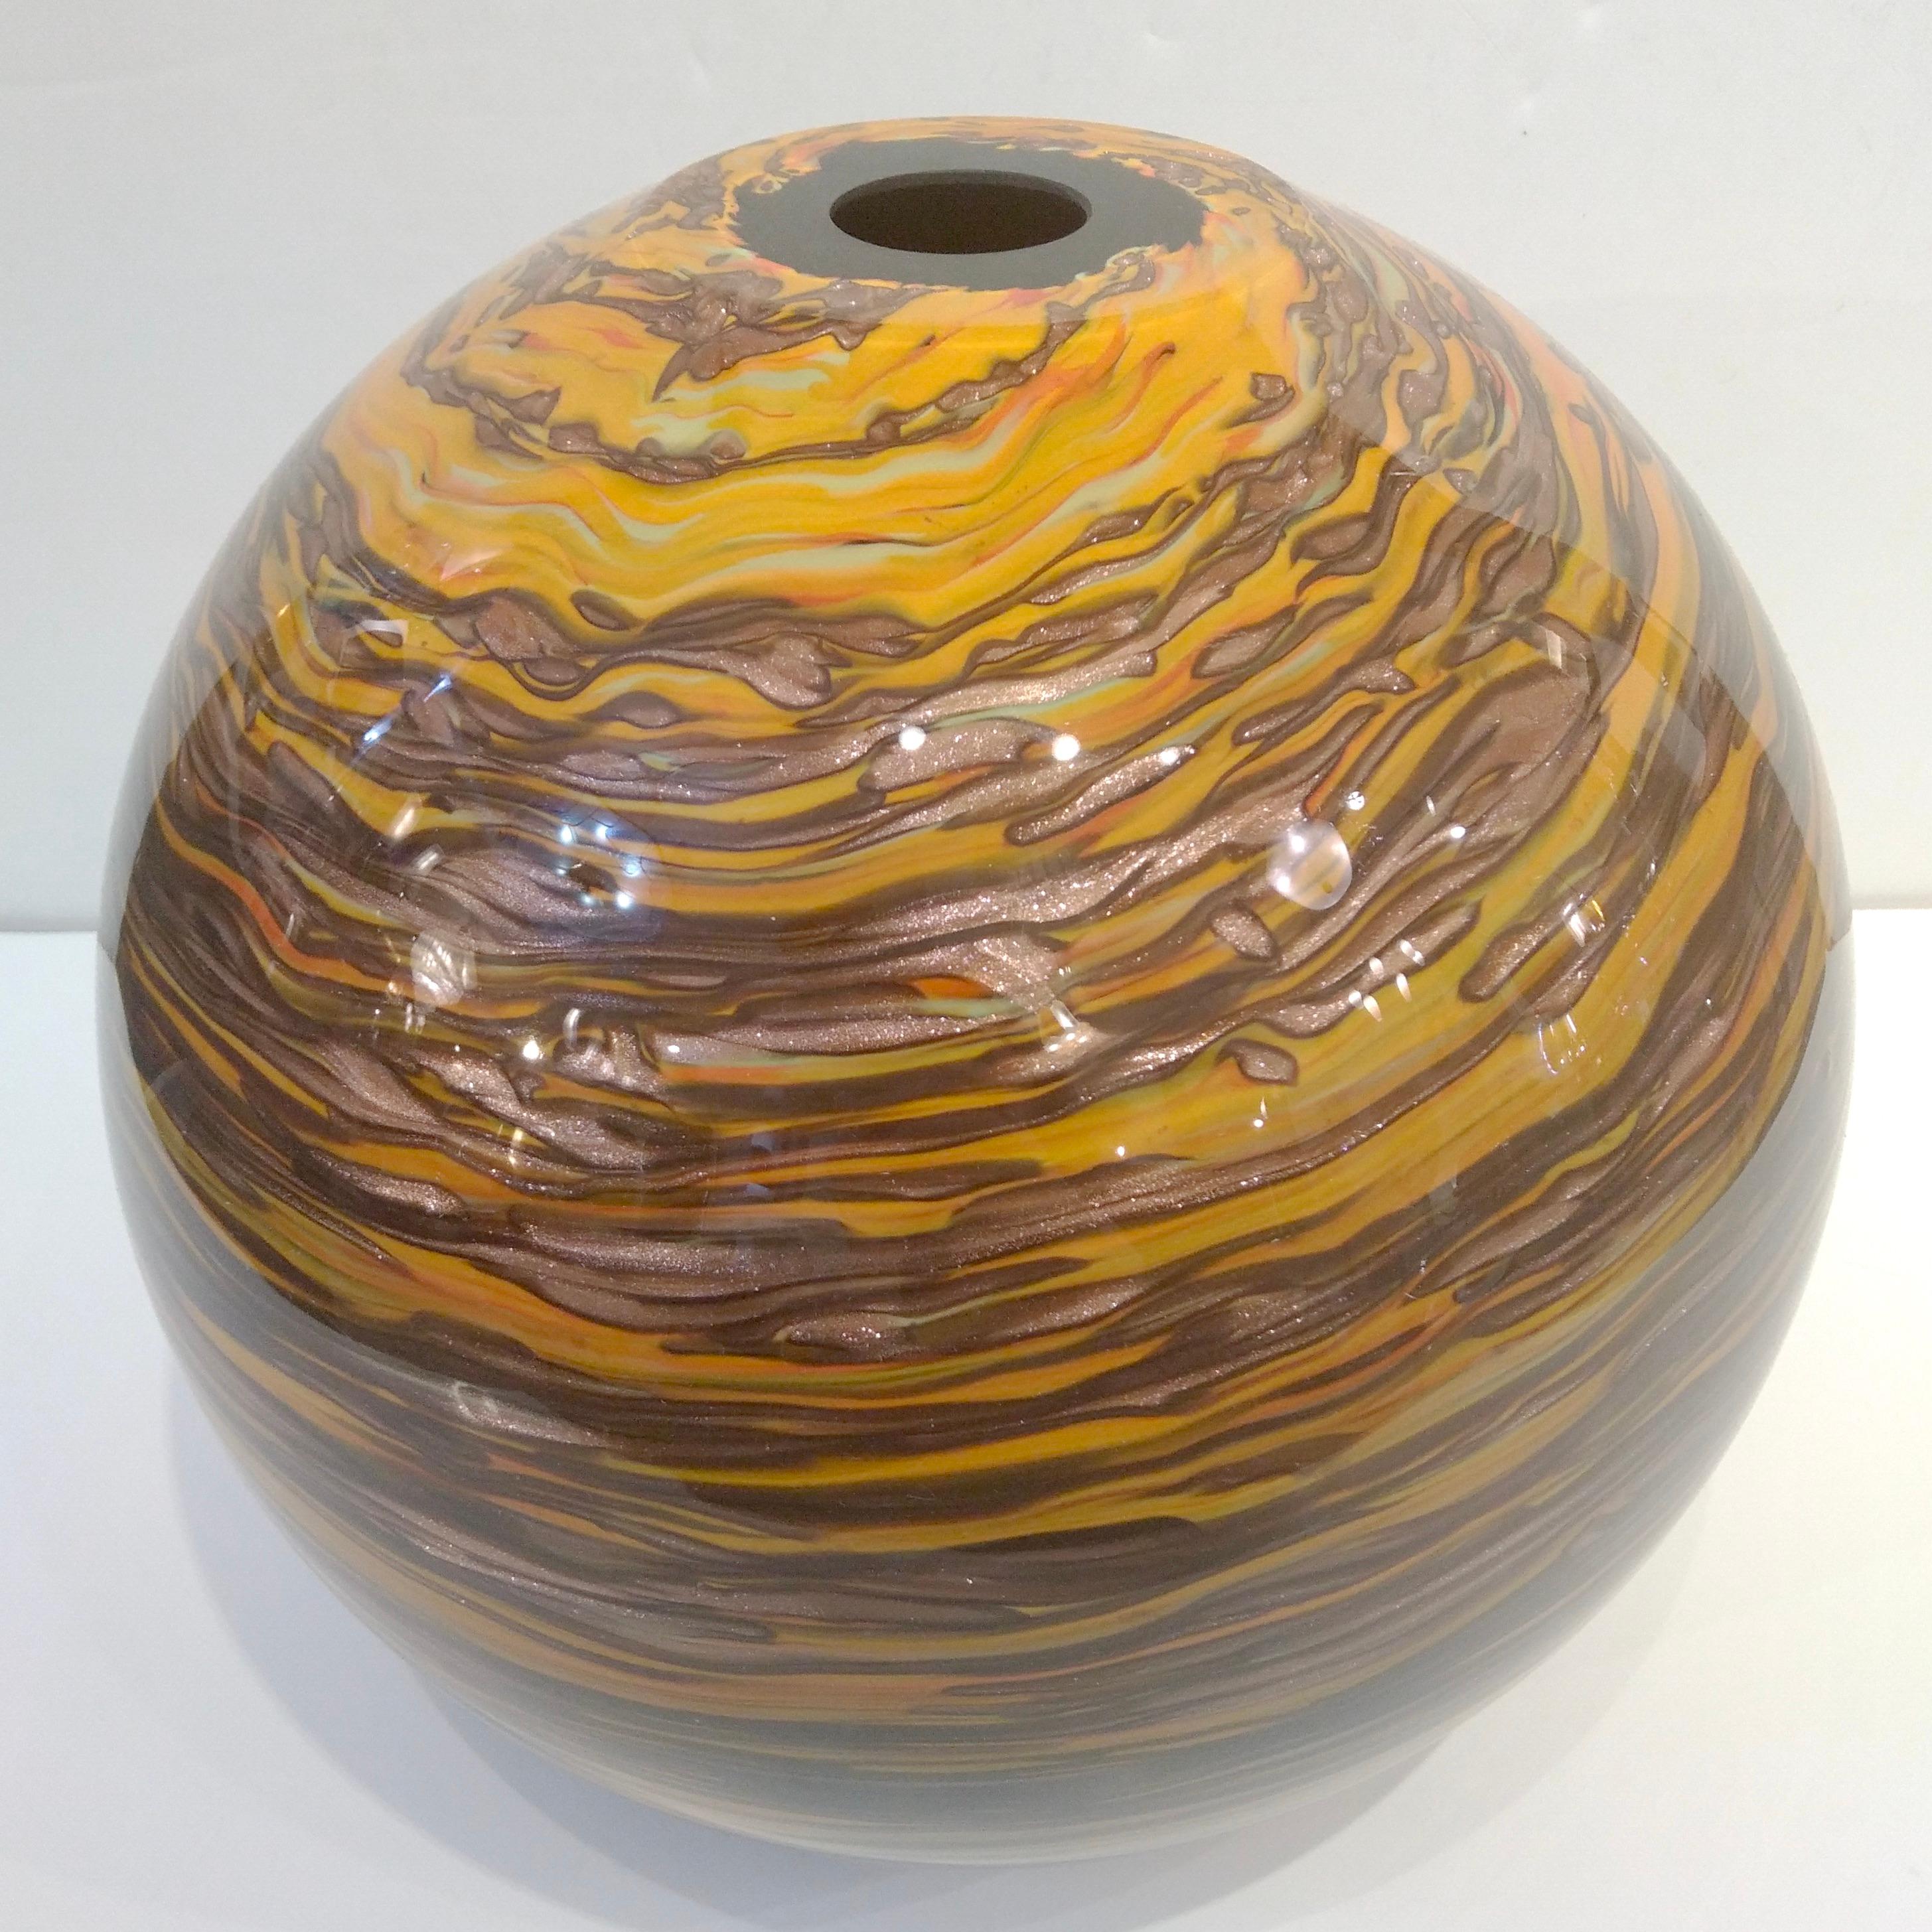 Formia 1980s Modern Round Brown Yellow Red Orange Gold Murano Glass Vase For Sale 4